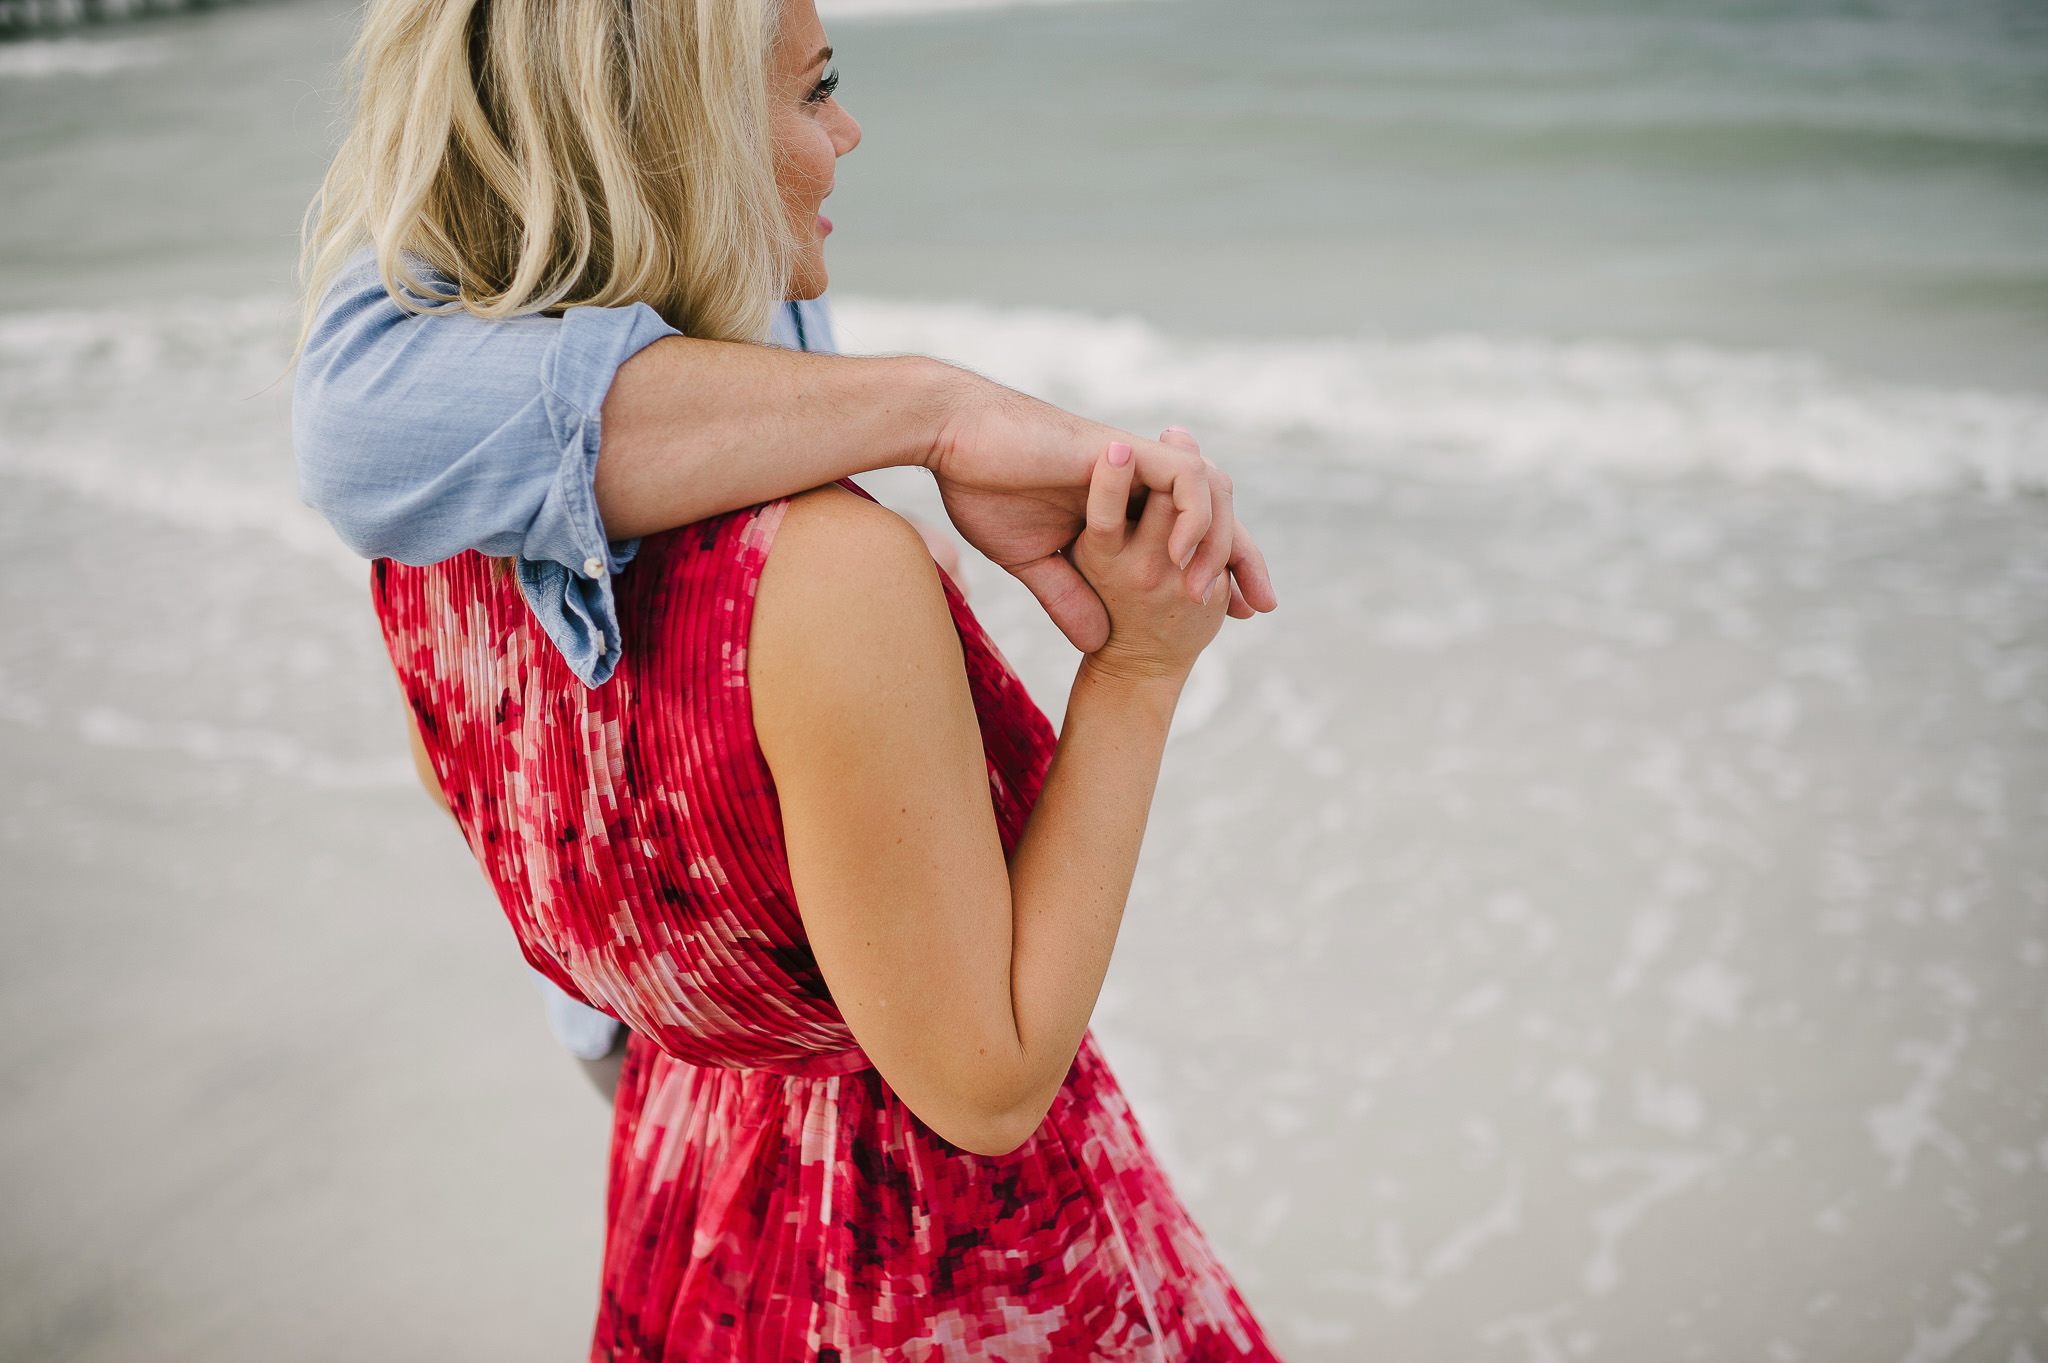 Beautiful Beach Engagement Pictures